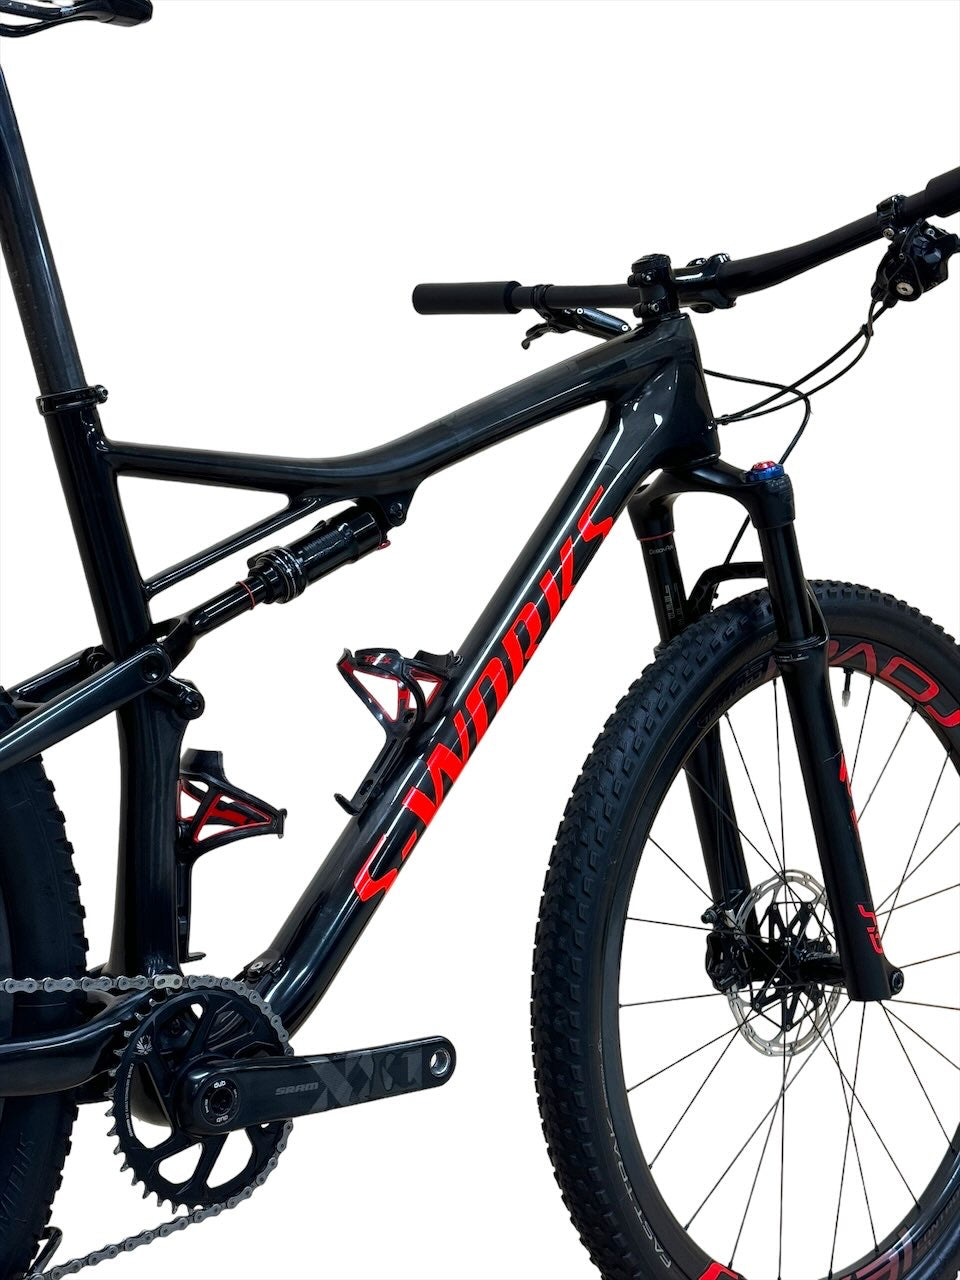 <tc>Specialized Epic S Works 29 tommers terrengsykkel</tc>